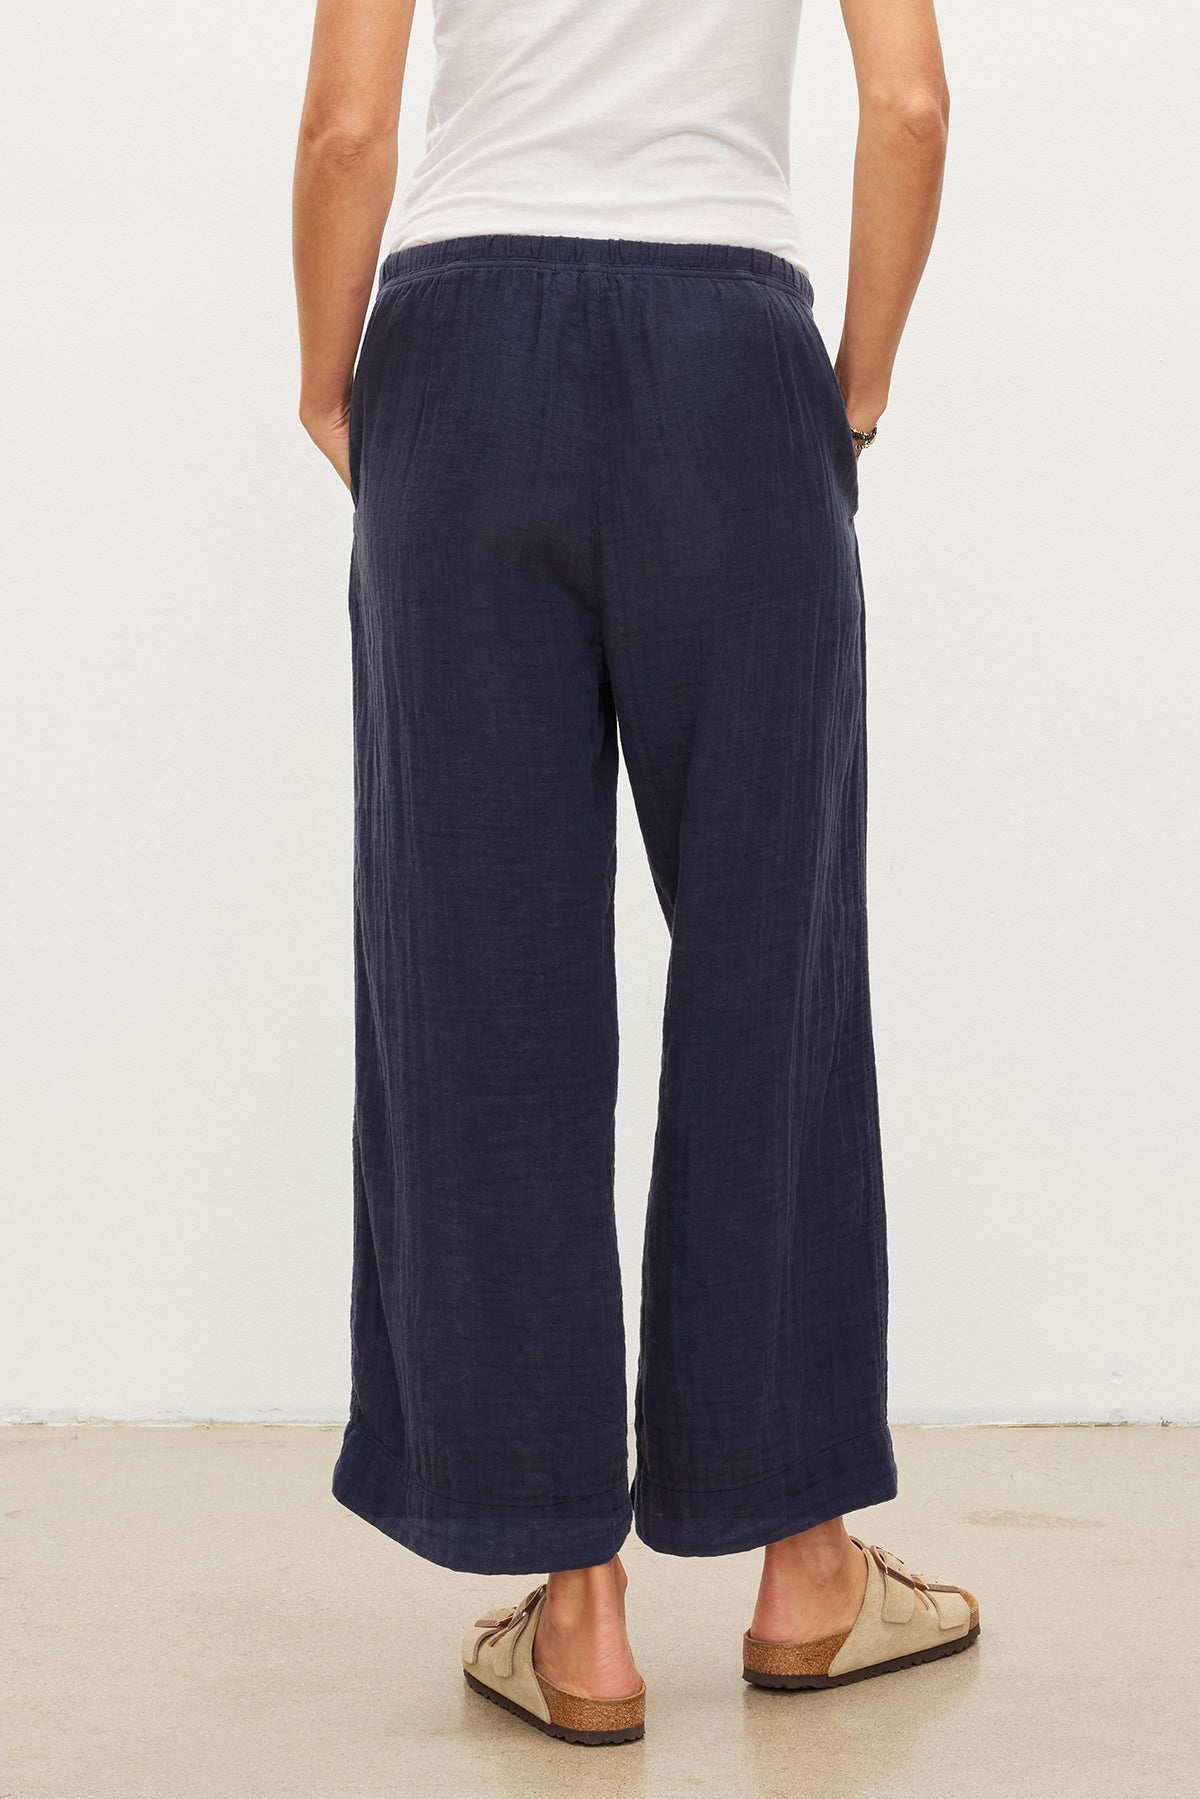 The back view of a woman wearing Velvet by Graham & Spencer's FRANNY COTTON GAUZE PANT, with a relaxed leg.-35955718095041